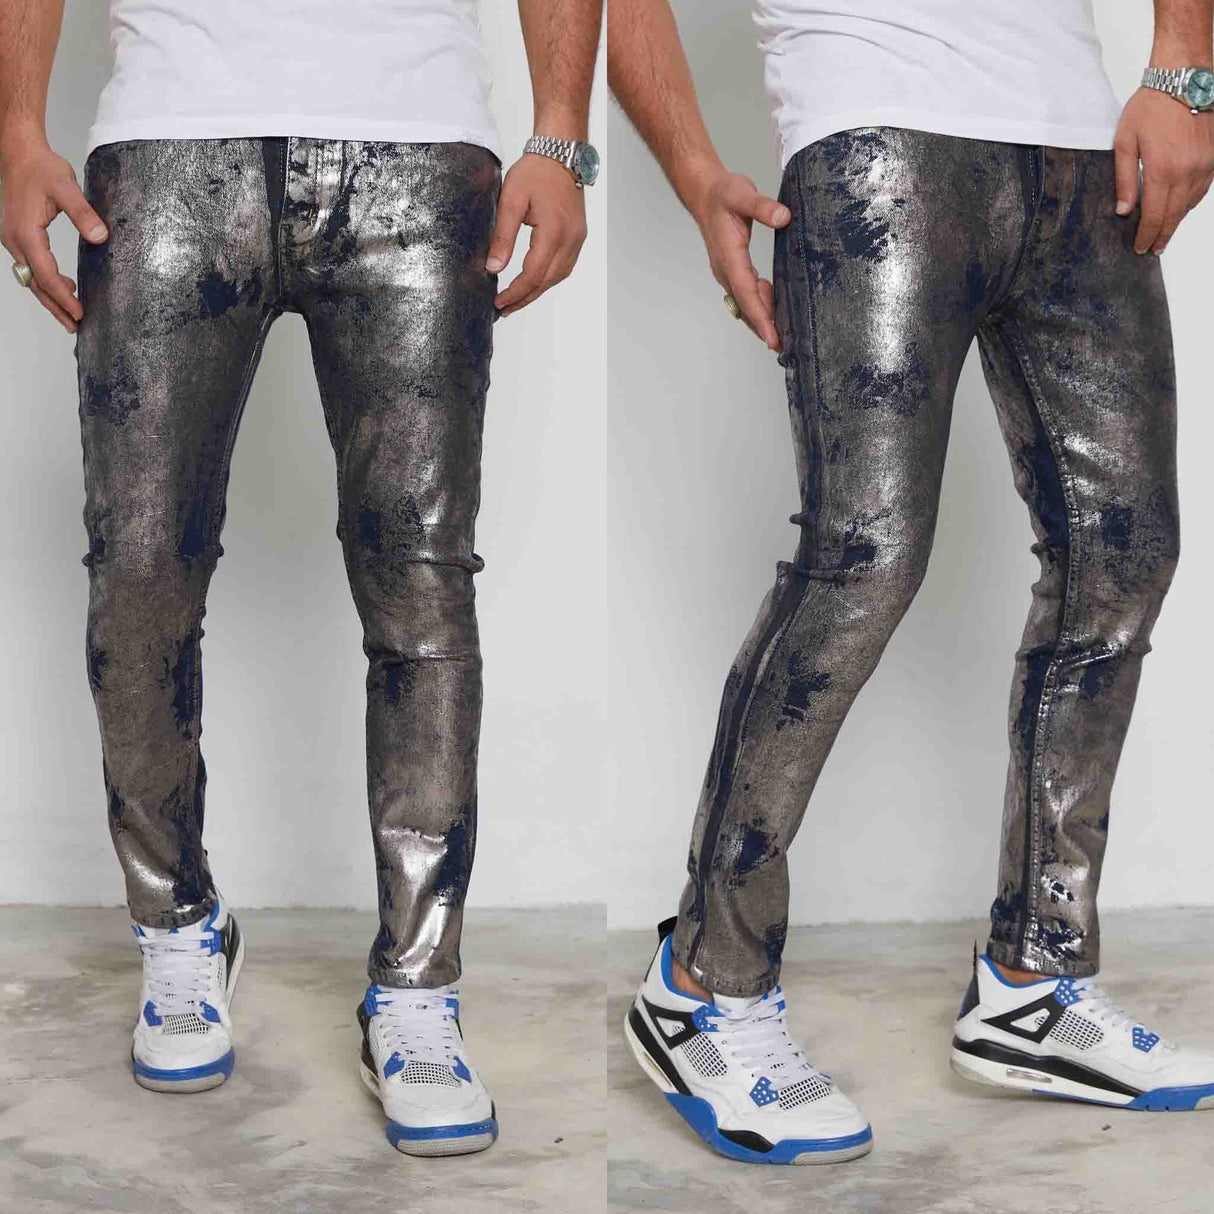 The HXD Skinny Silver _Black_Jeans for men or Tomboy style